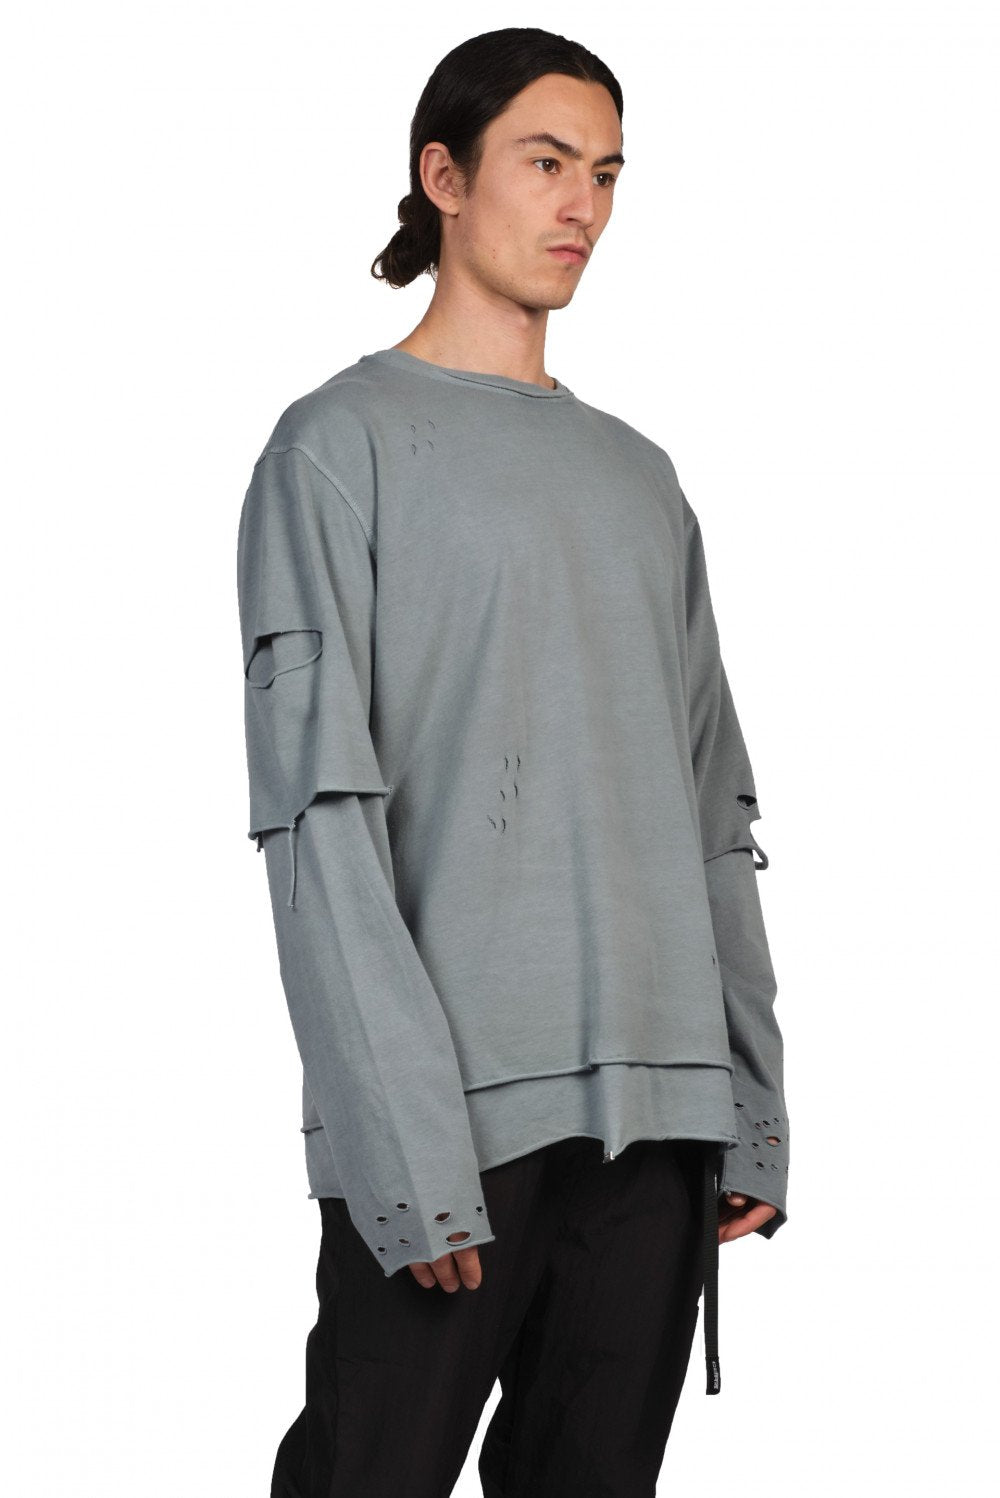 C2H4 Grey Distressed Double Layer Long-Sleeve T-Shirt